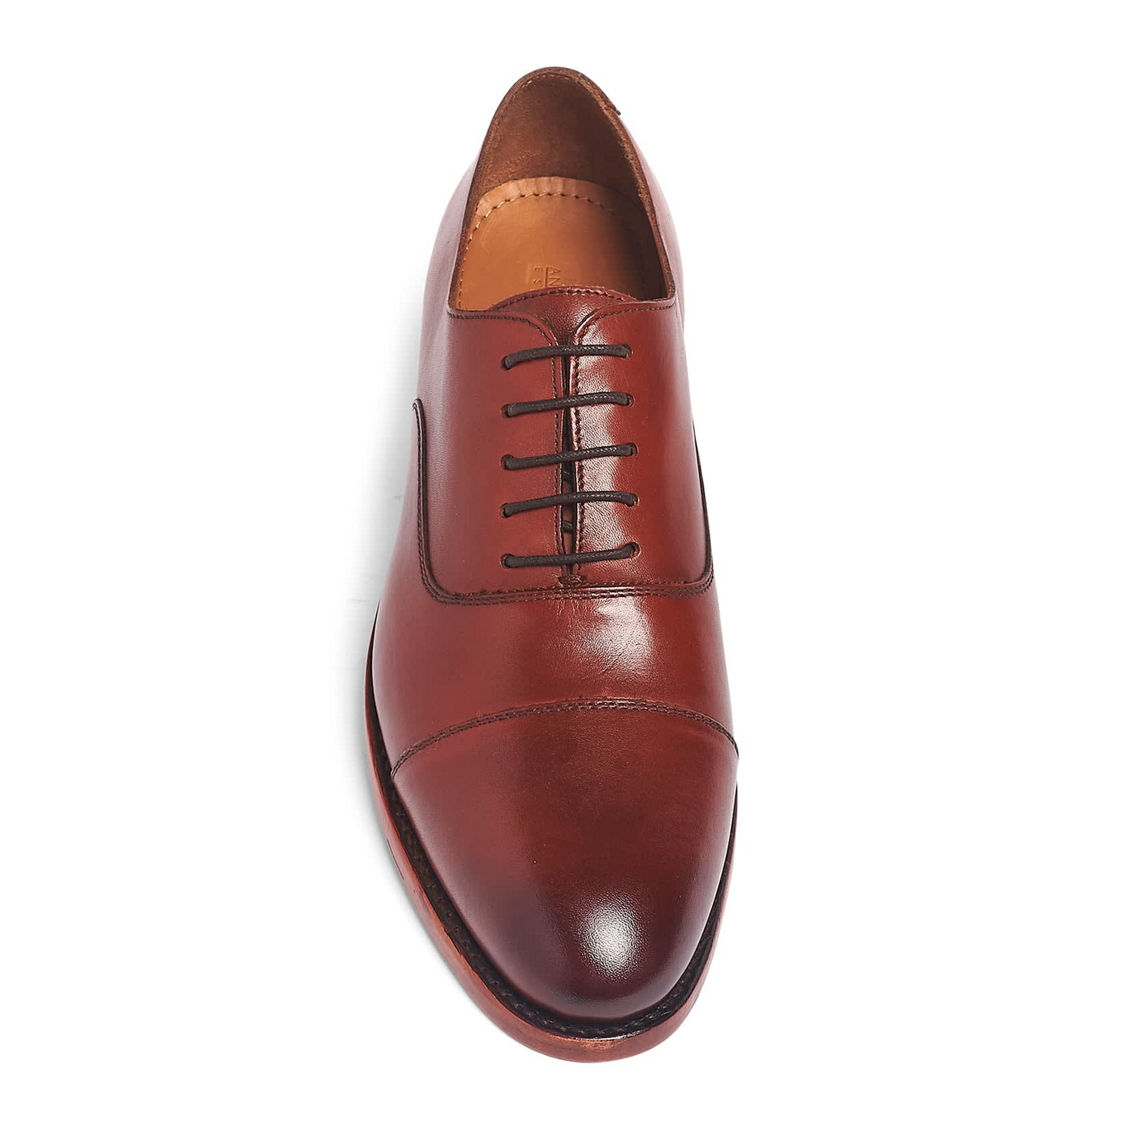 Anthony Veer Mens Clinton Cap-Toe Goodyear Welt Oxford Lace-up Dress Shoe - Image 3 of 5